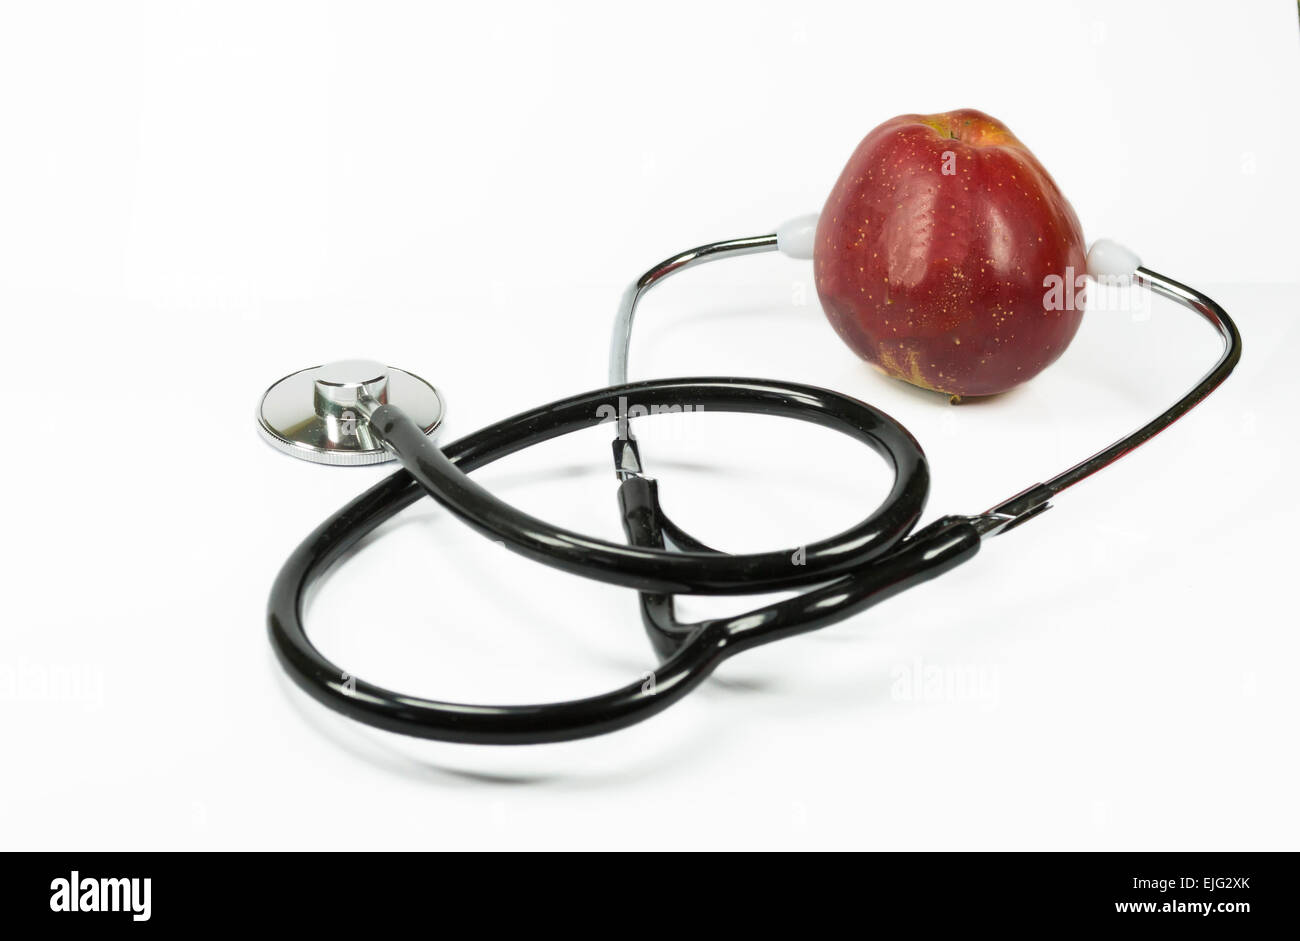 Red apple held between the ears of a medical stethoscope , conceptual image about healthy lifestyle and benefits of fruit consum Stock Photo